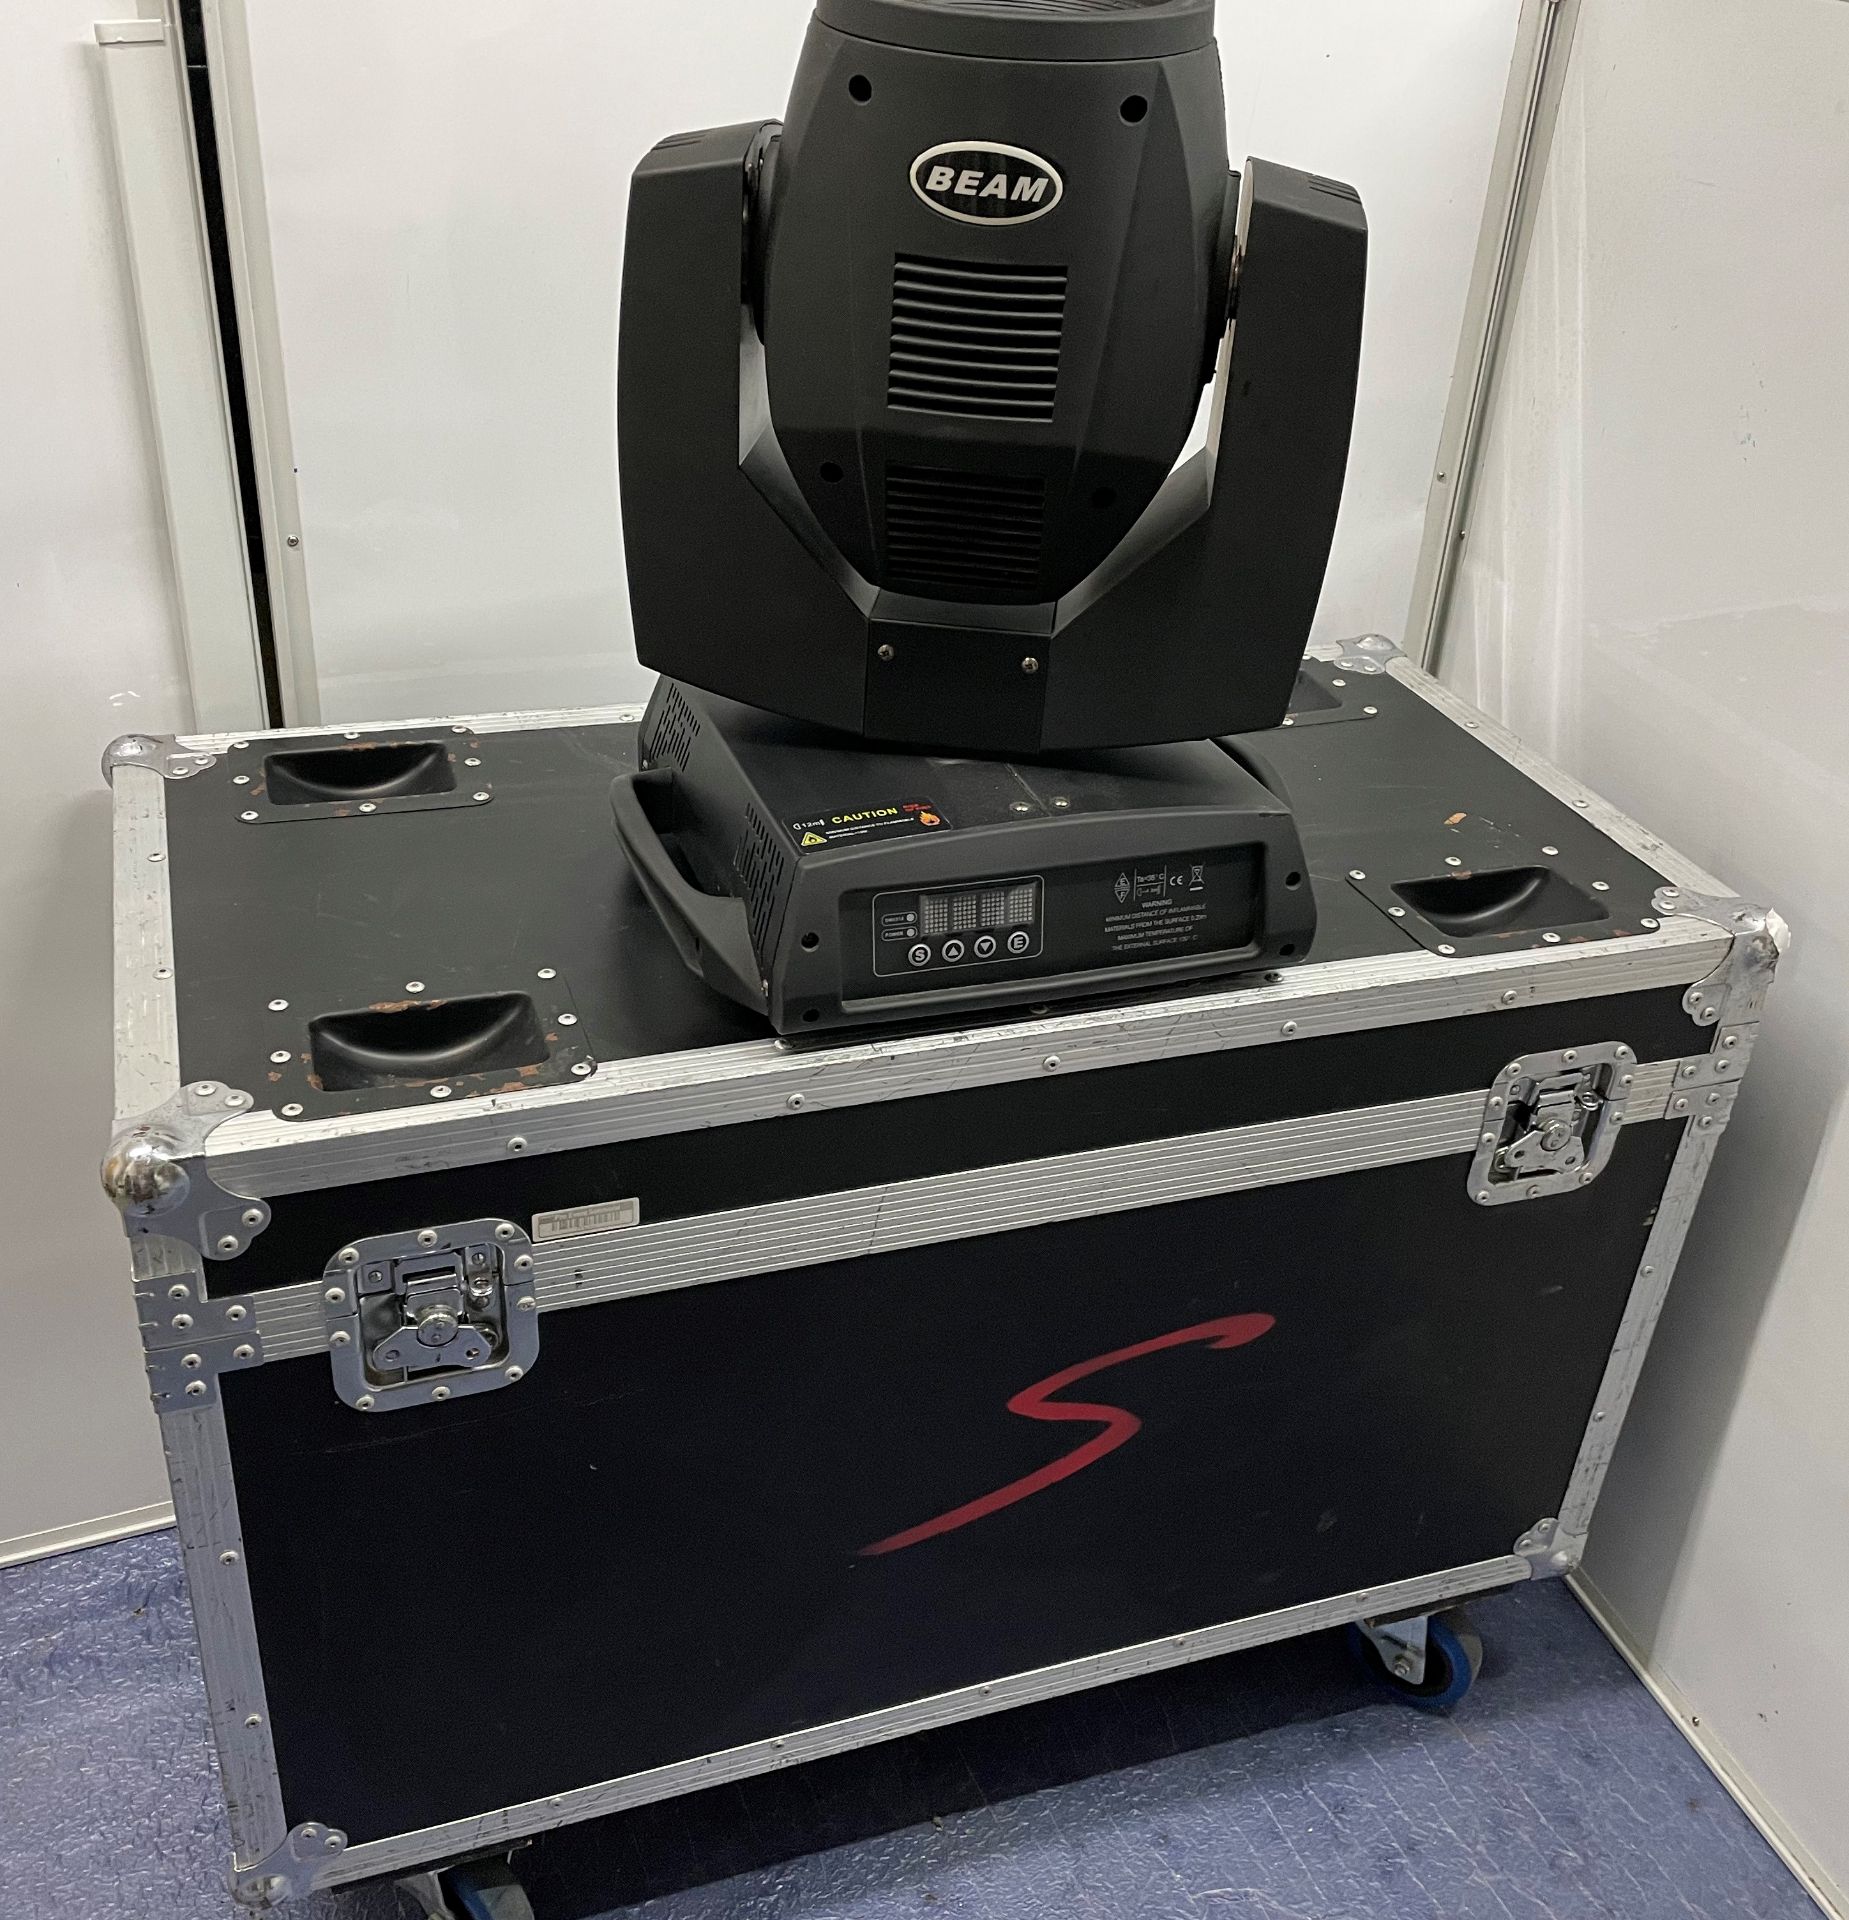 4 BEAM Model QF-2017B 200W Moving Head Spot Lights (ex hire, used condition)-located at Pro Event